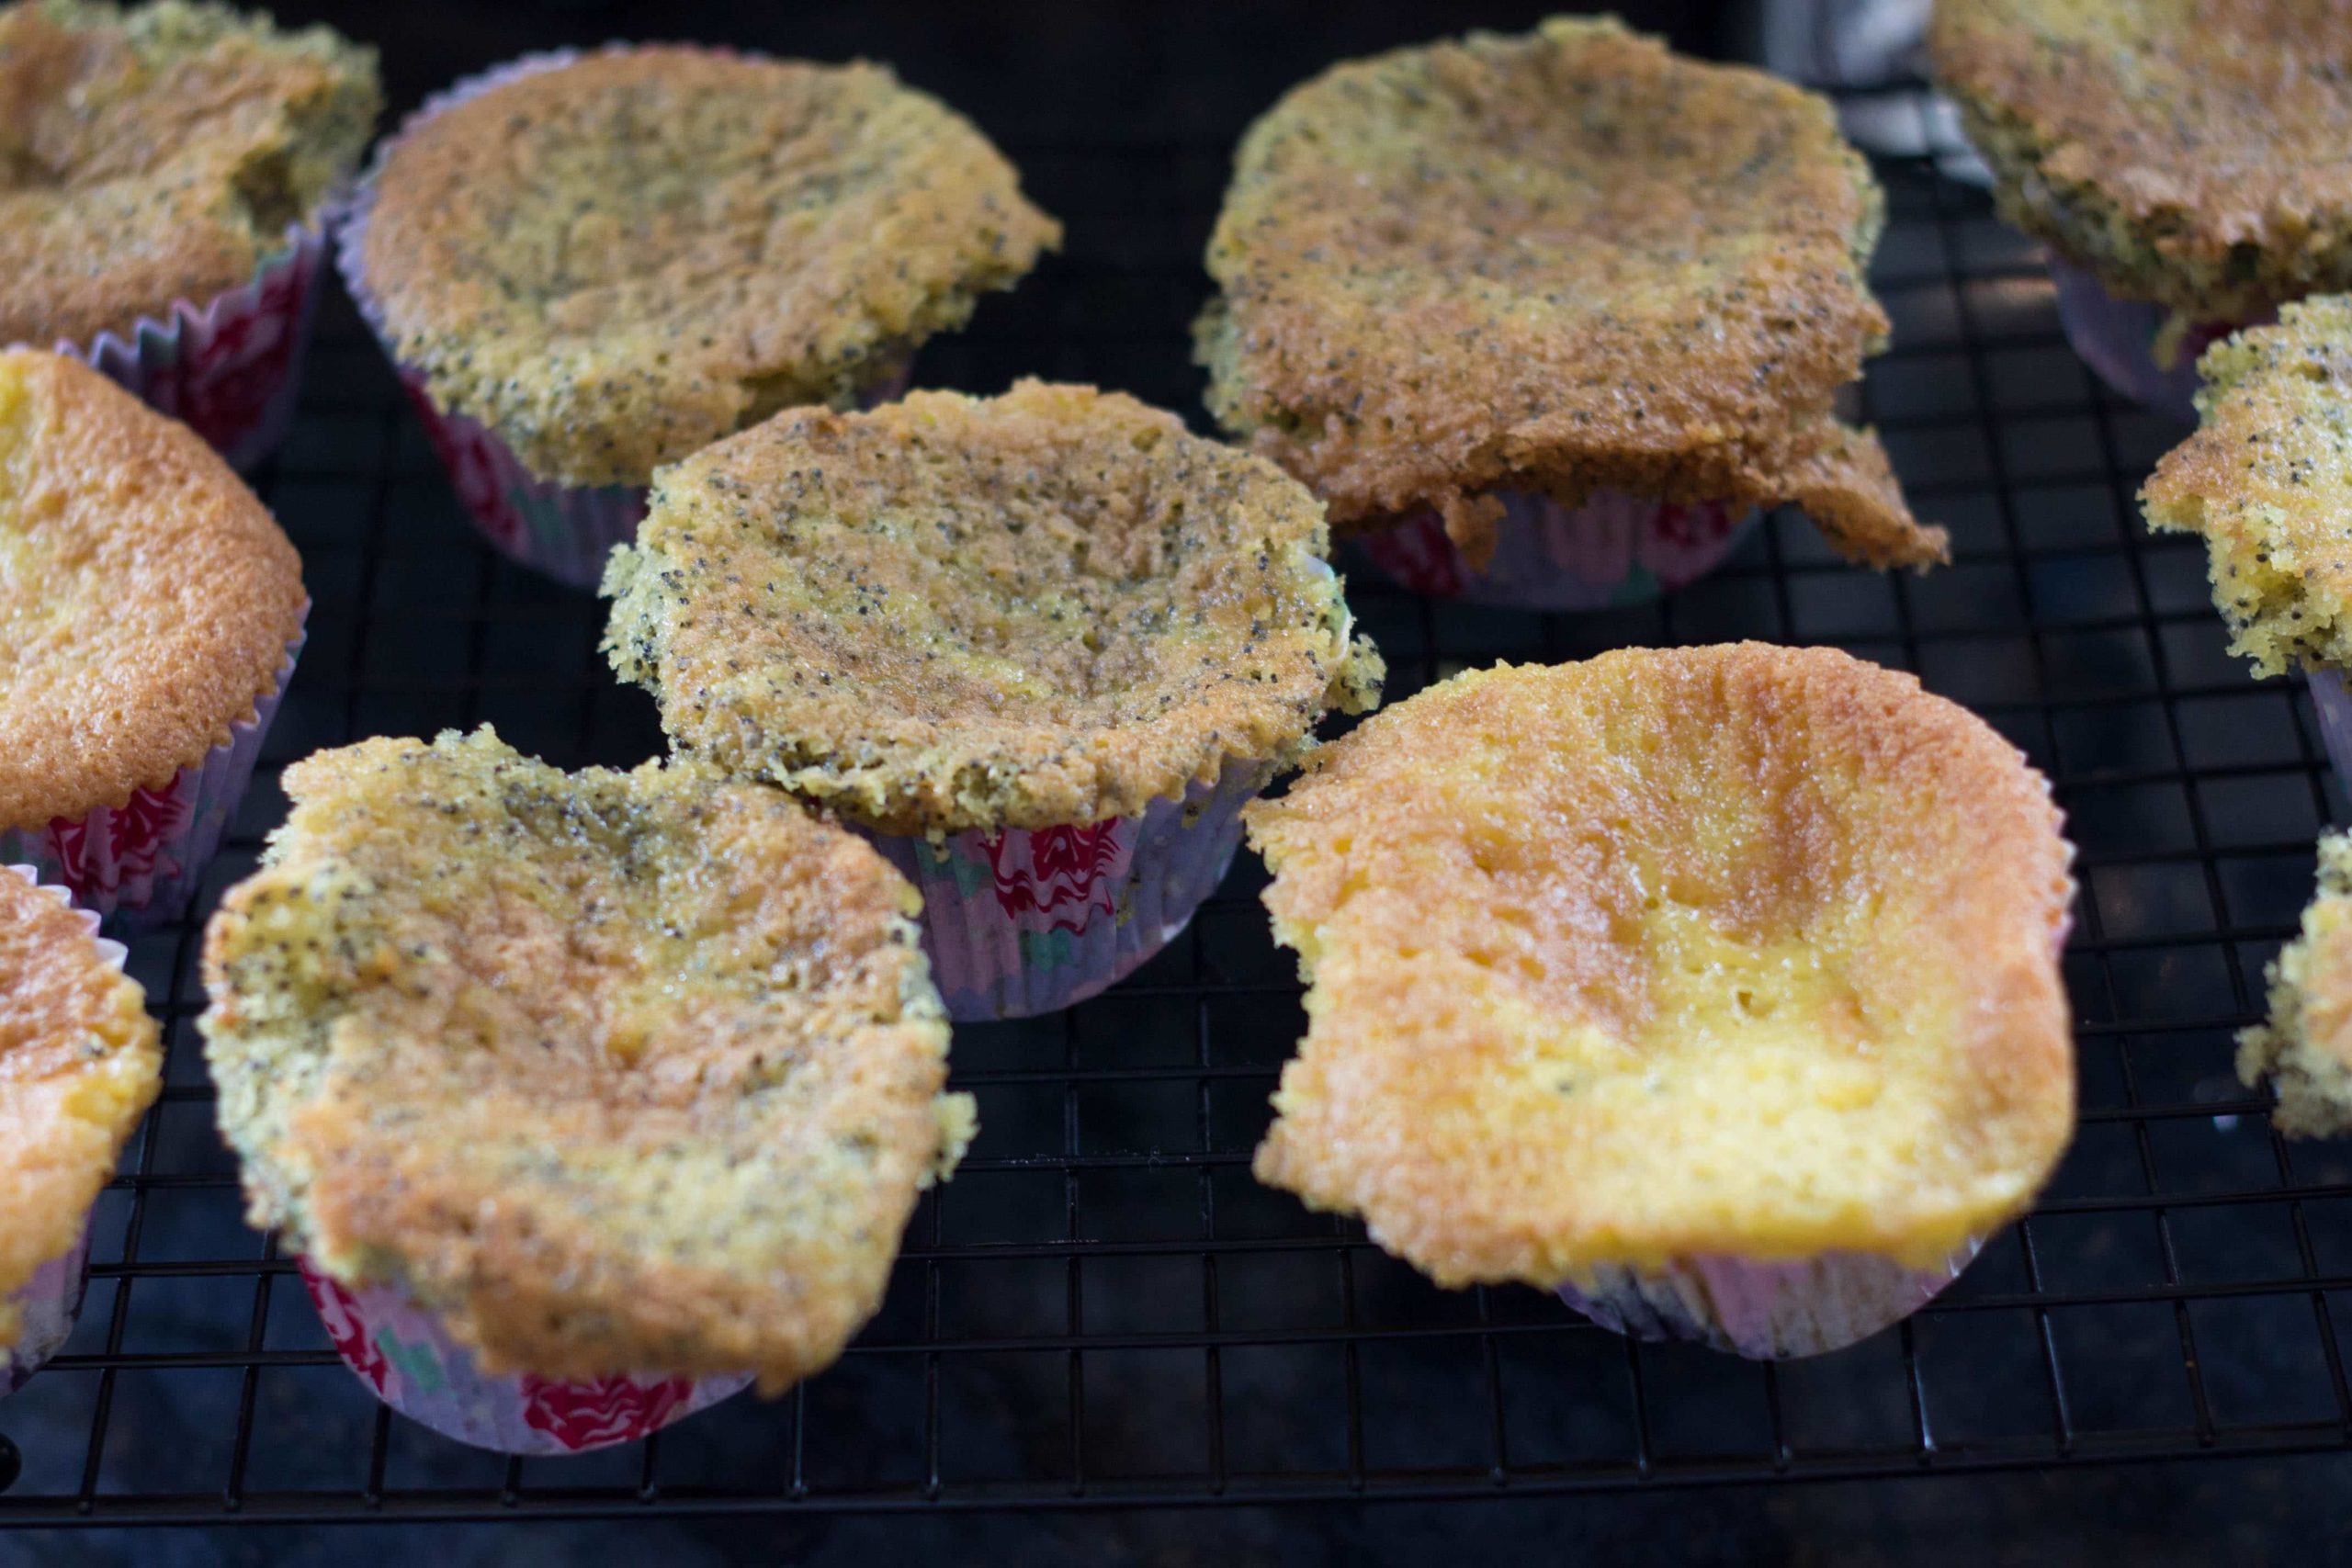 lemon and poppyseed muffins sunken in the middle.